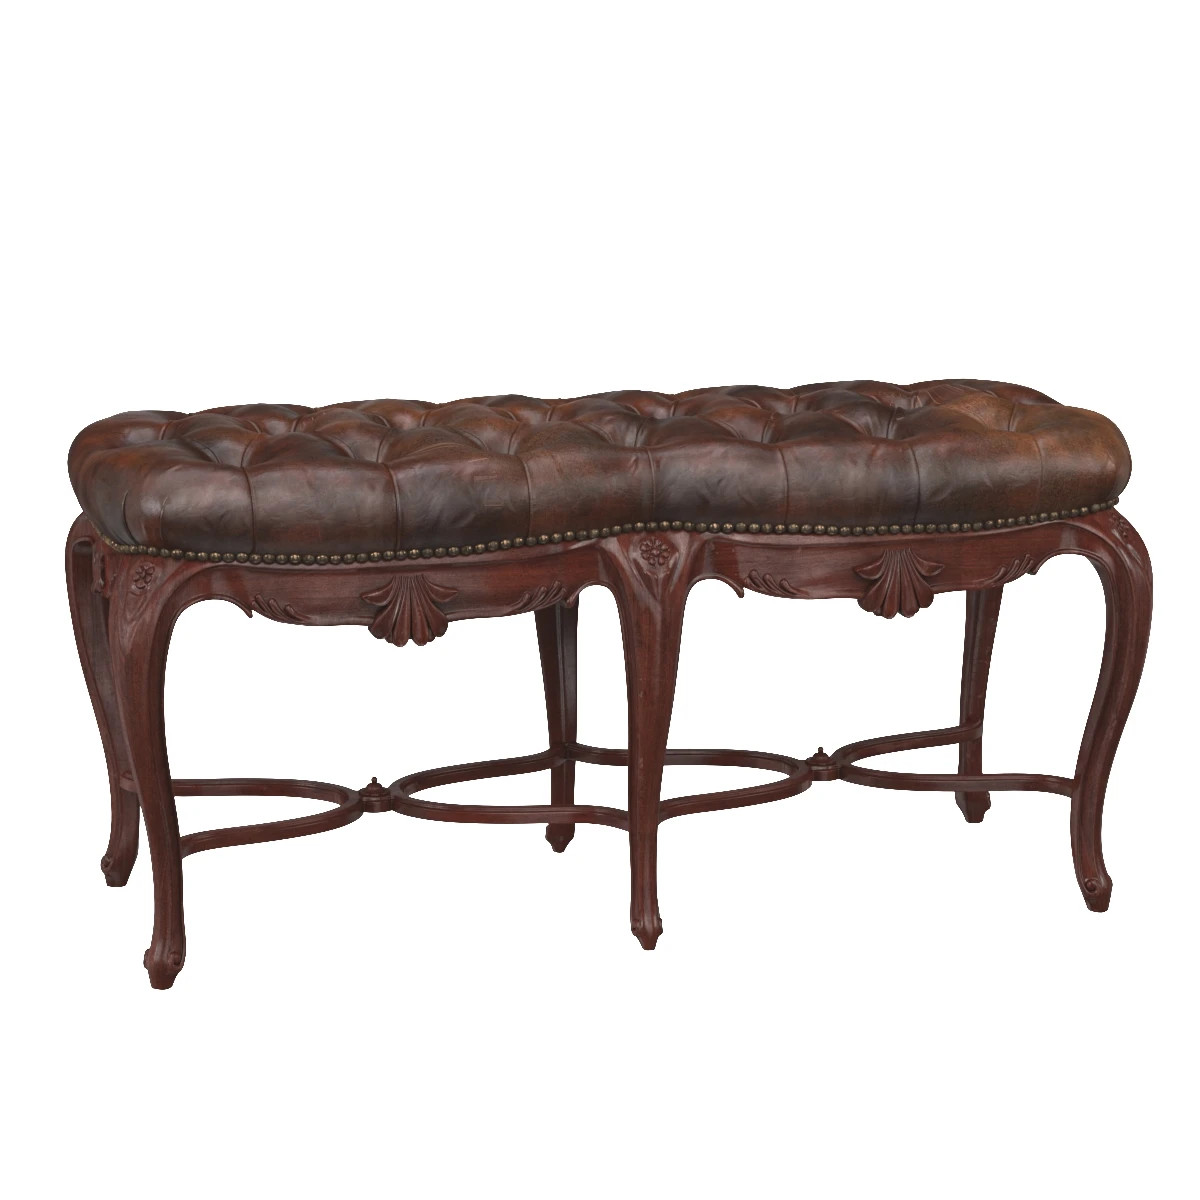 French Leather Tufted Bench C 1900s 3D Model_01